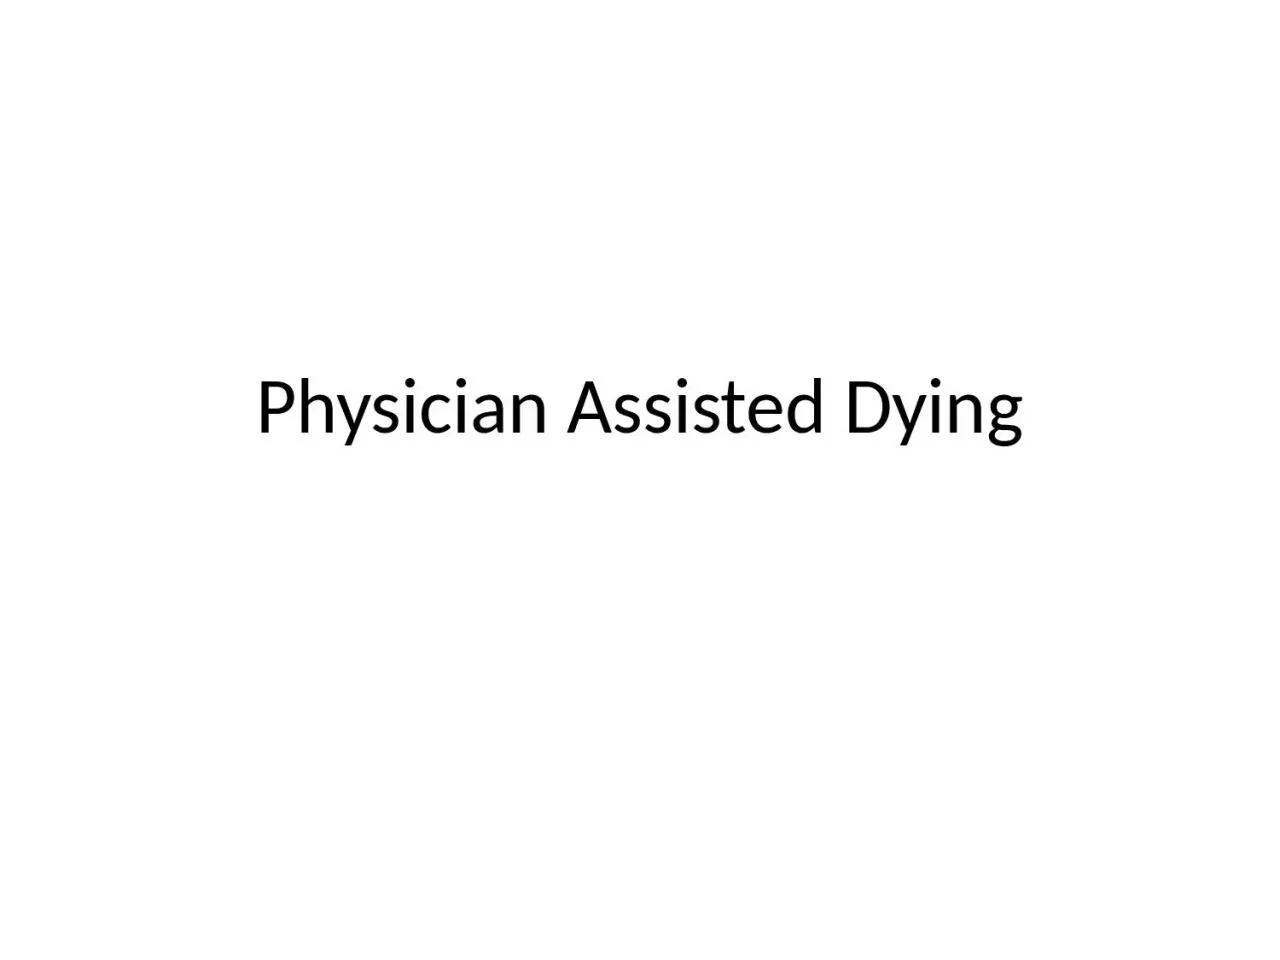 Physician Assisted Dying